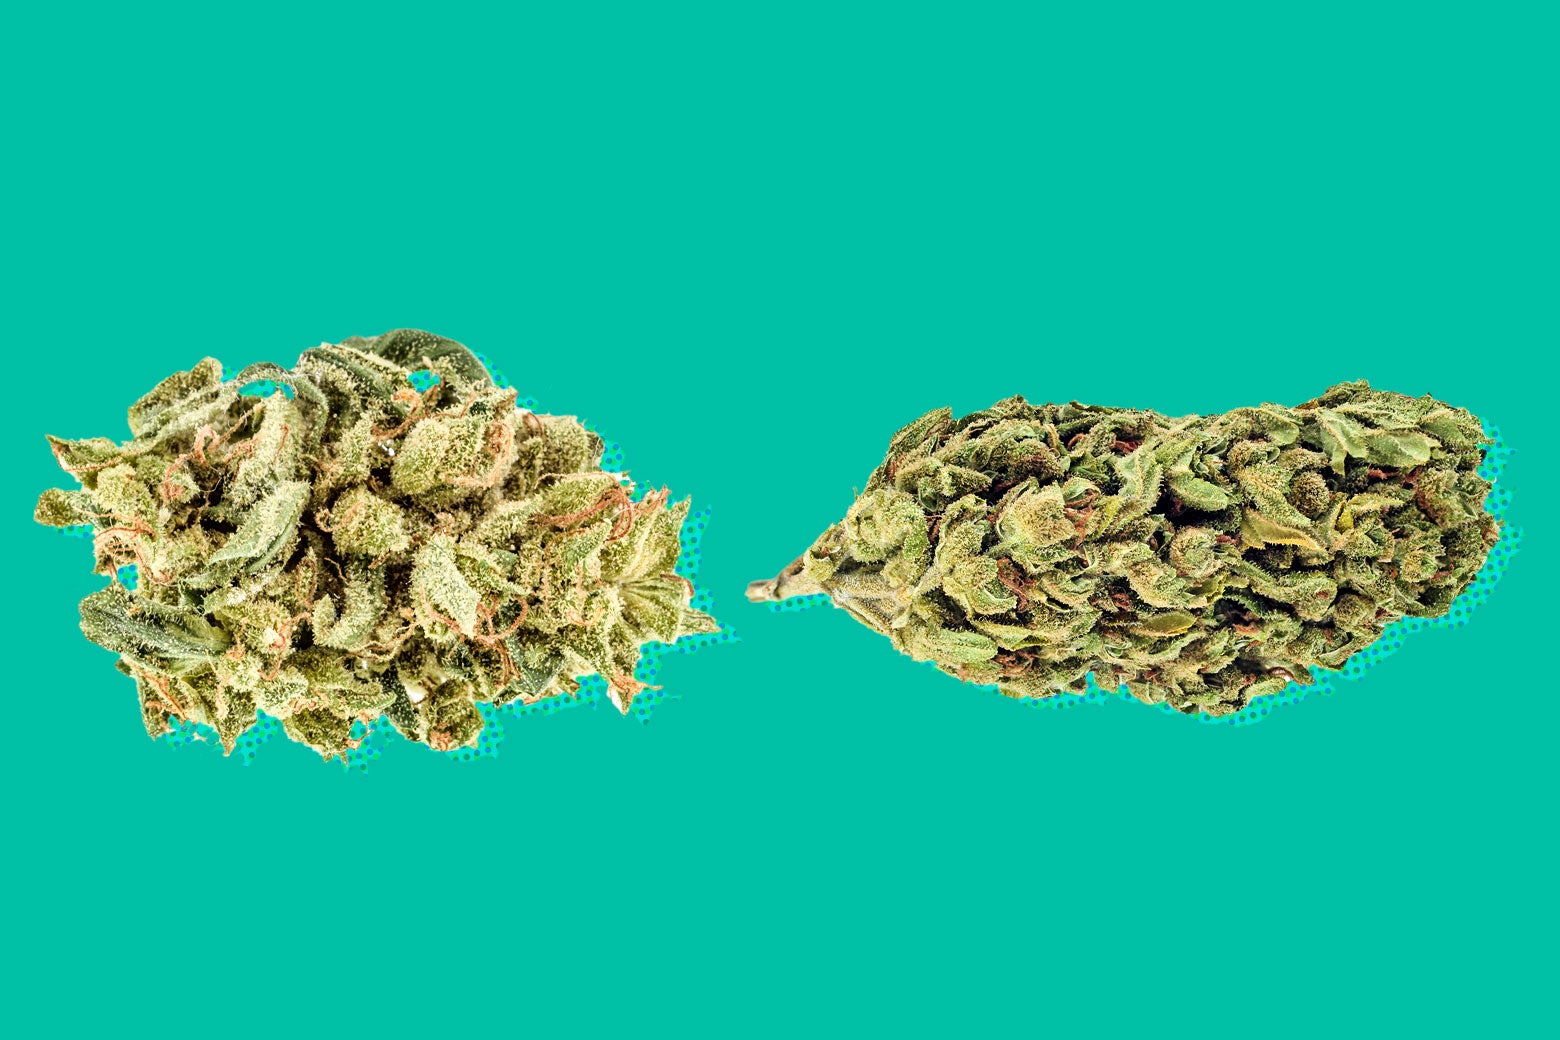 Two buds of weed.